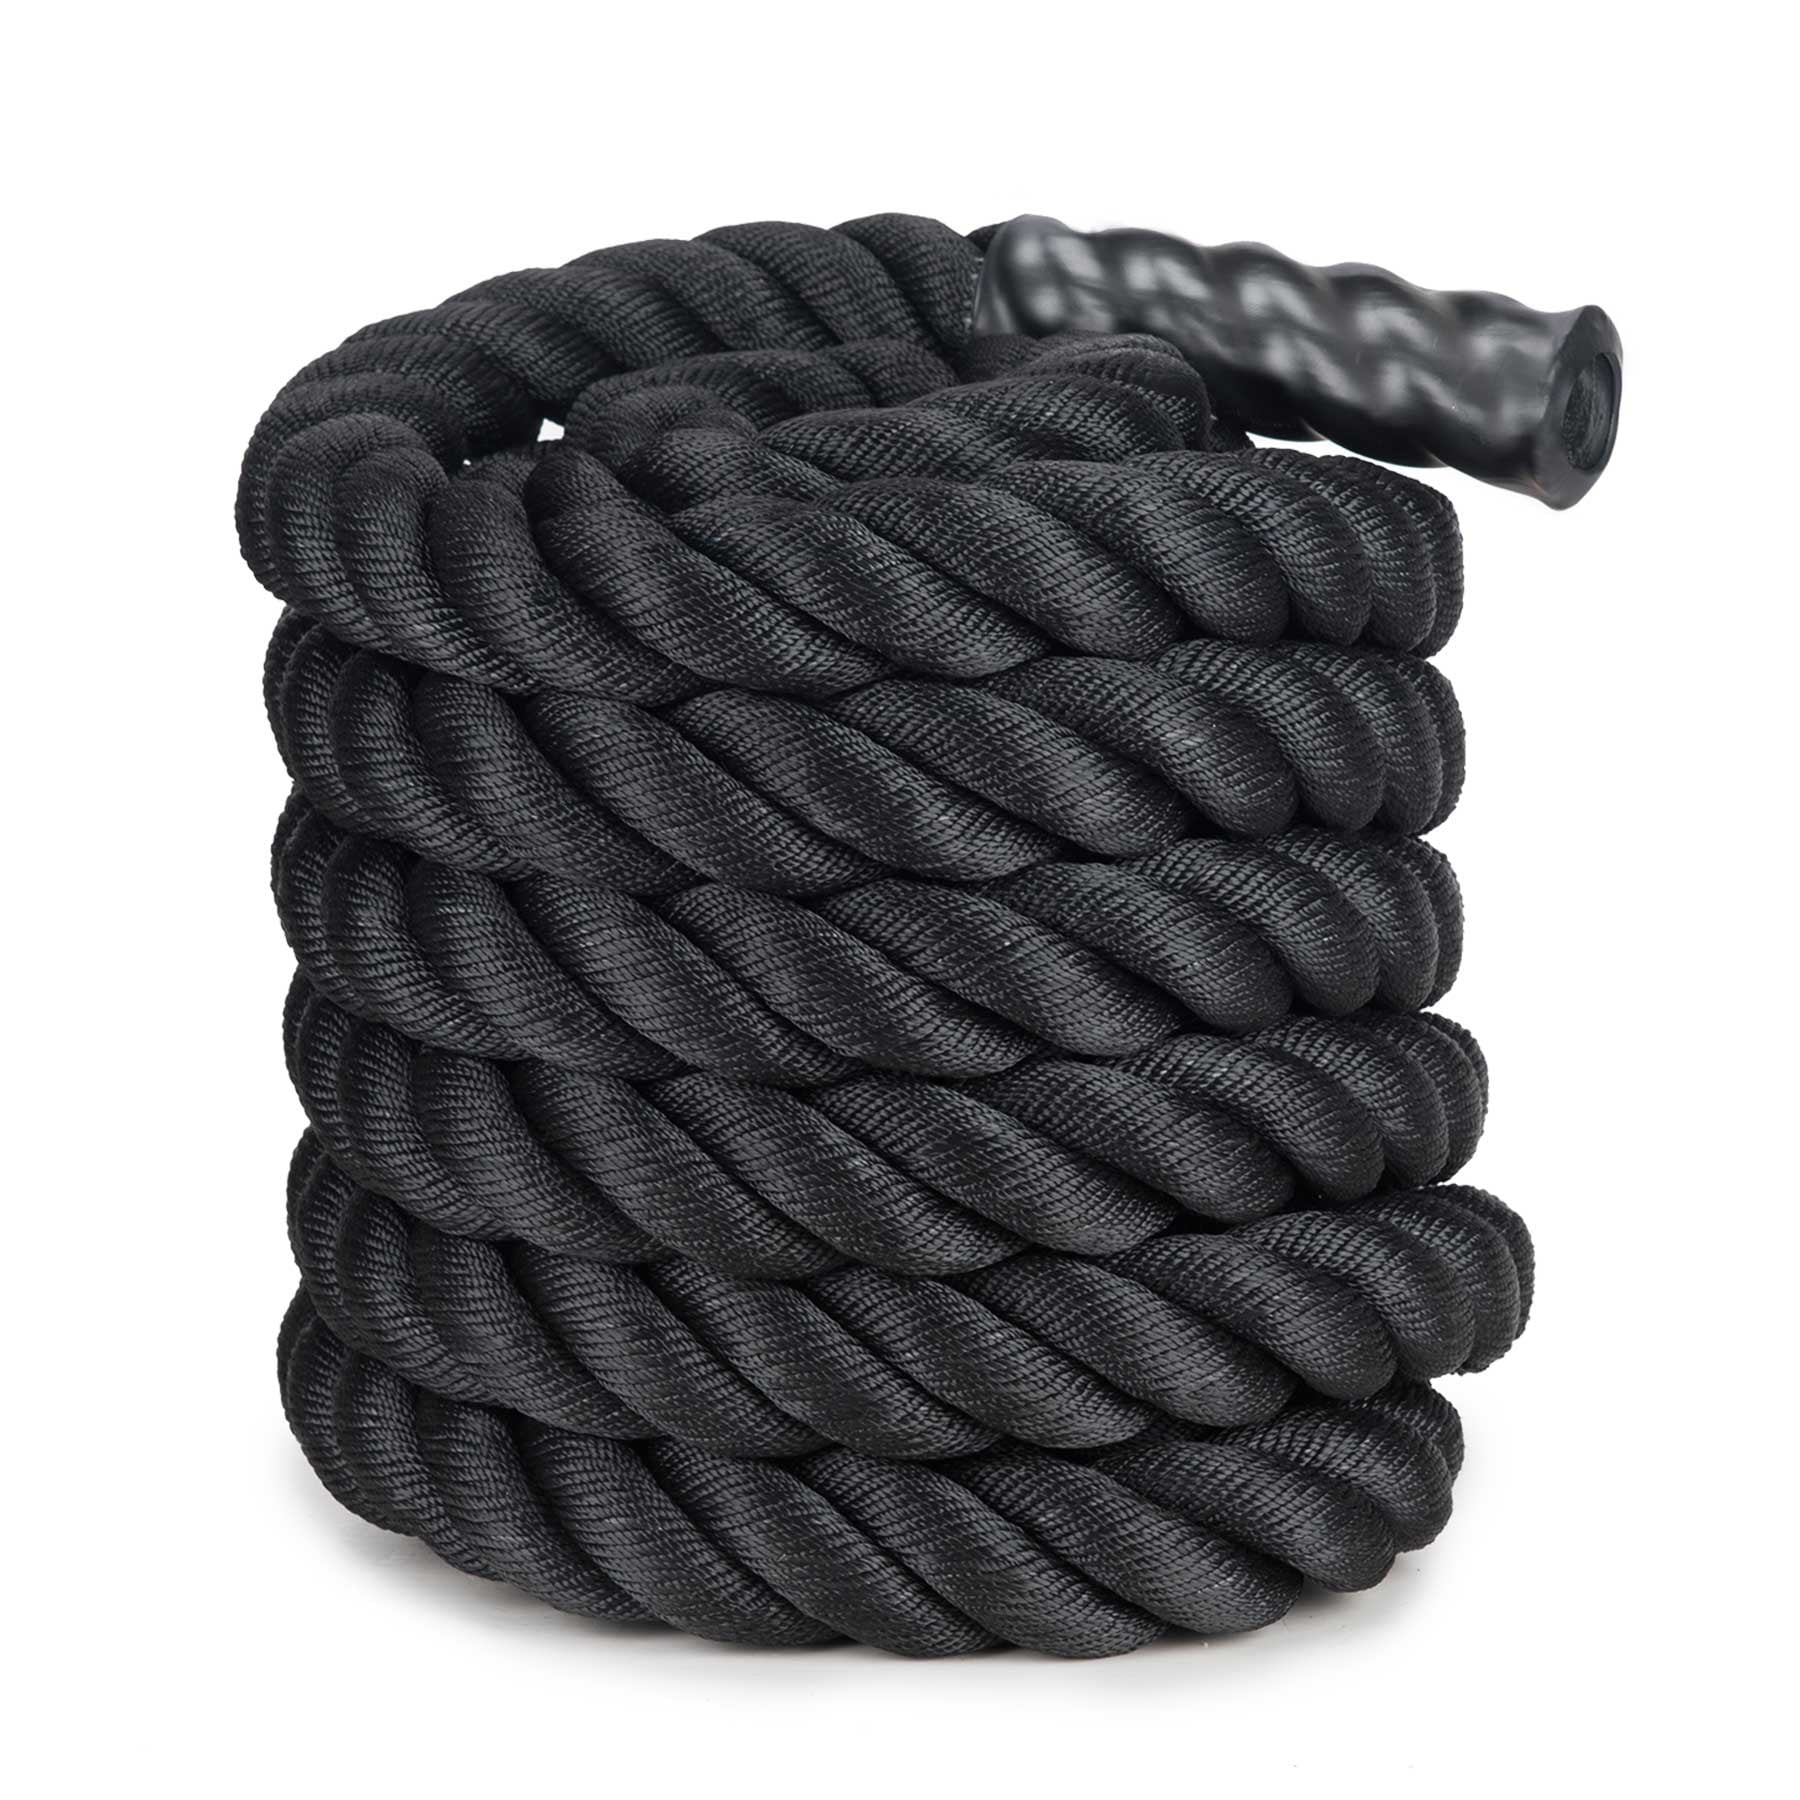 Battle Rope Sport Exercice 12M 38MM Fitness Physique Combat Gym